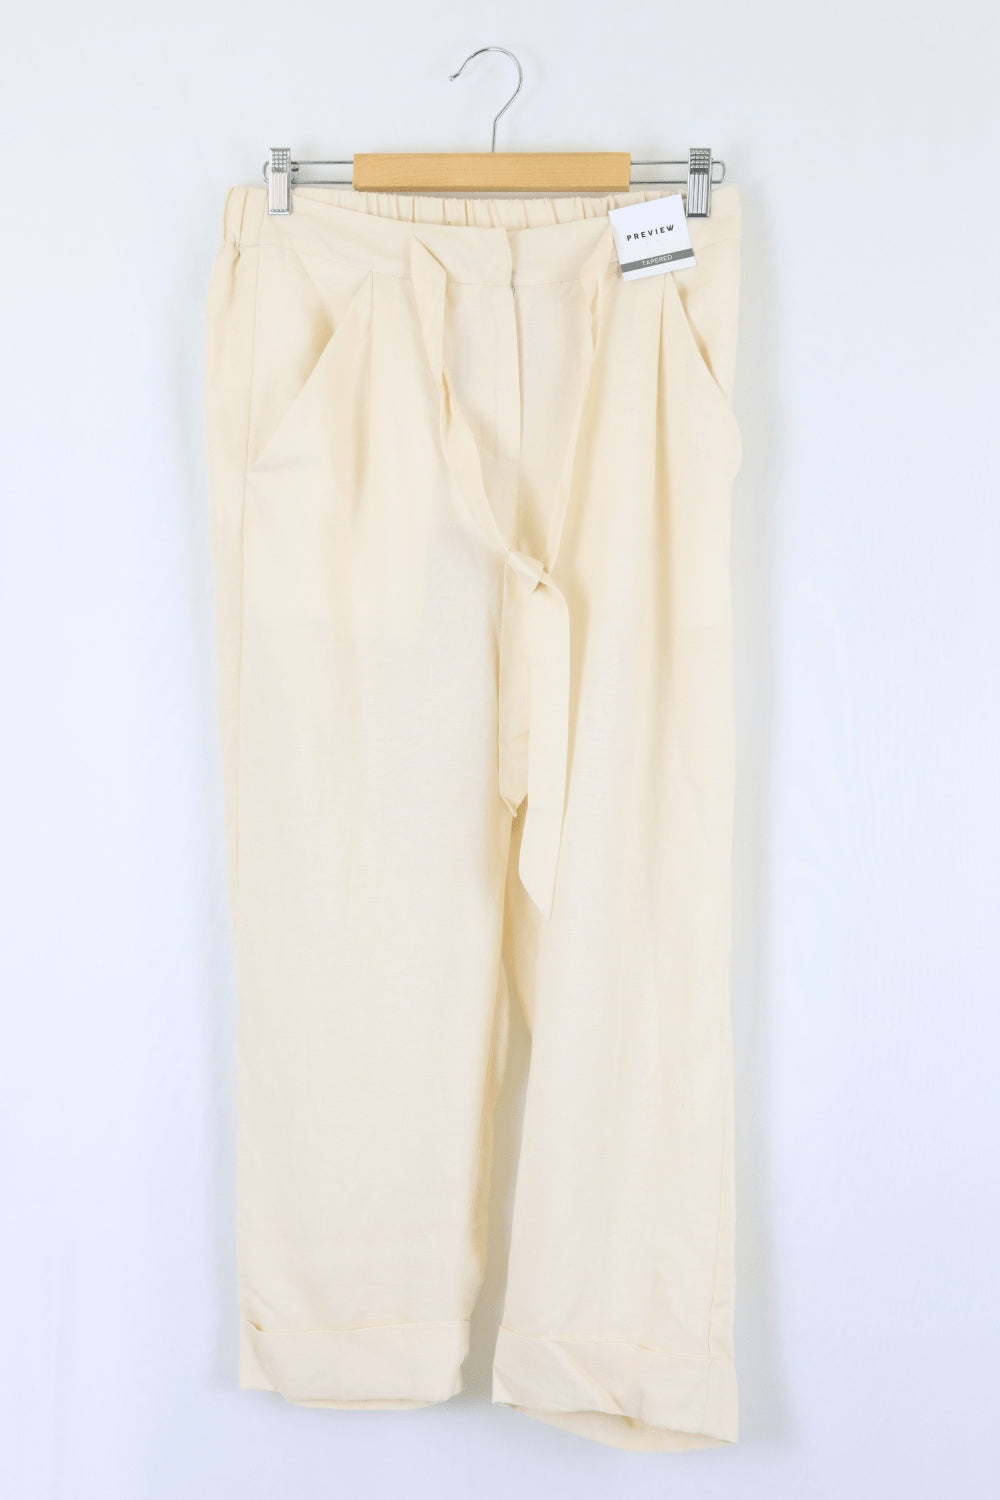 Preview Beige Pants 10